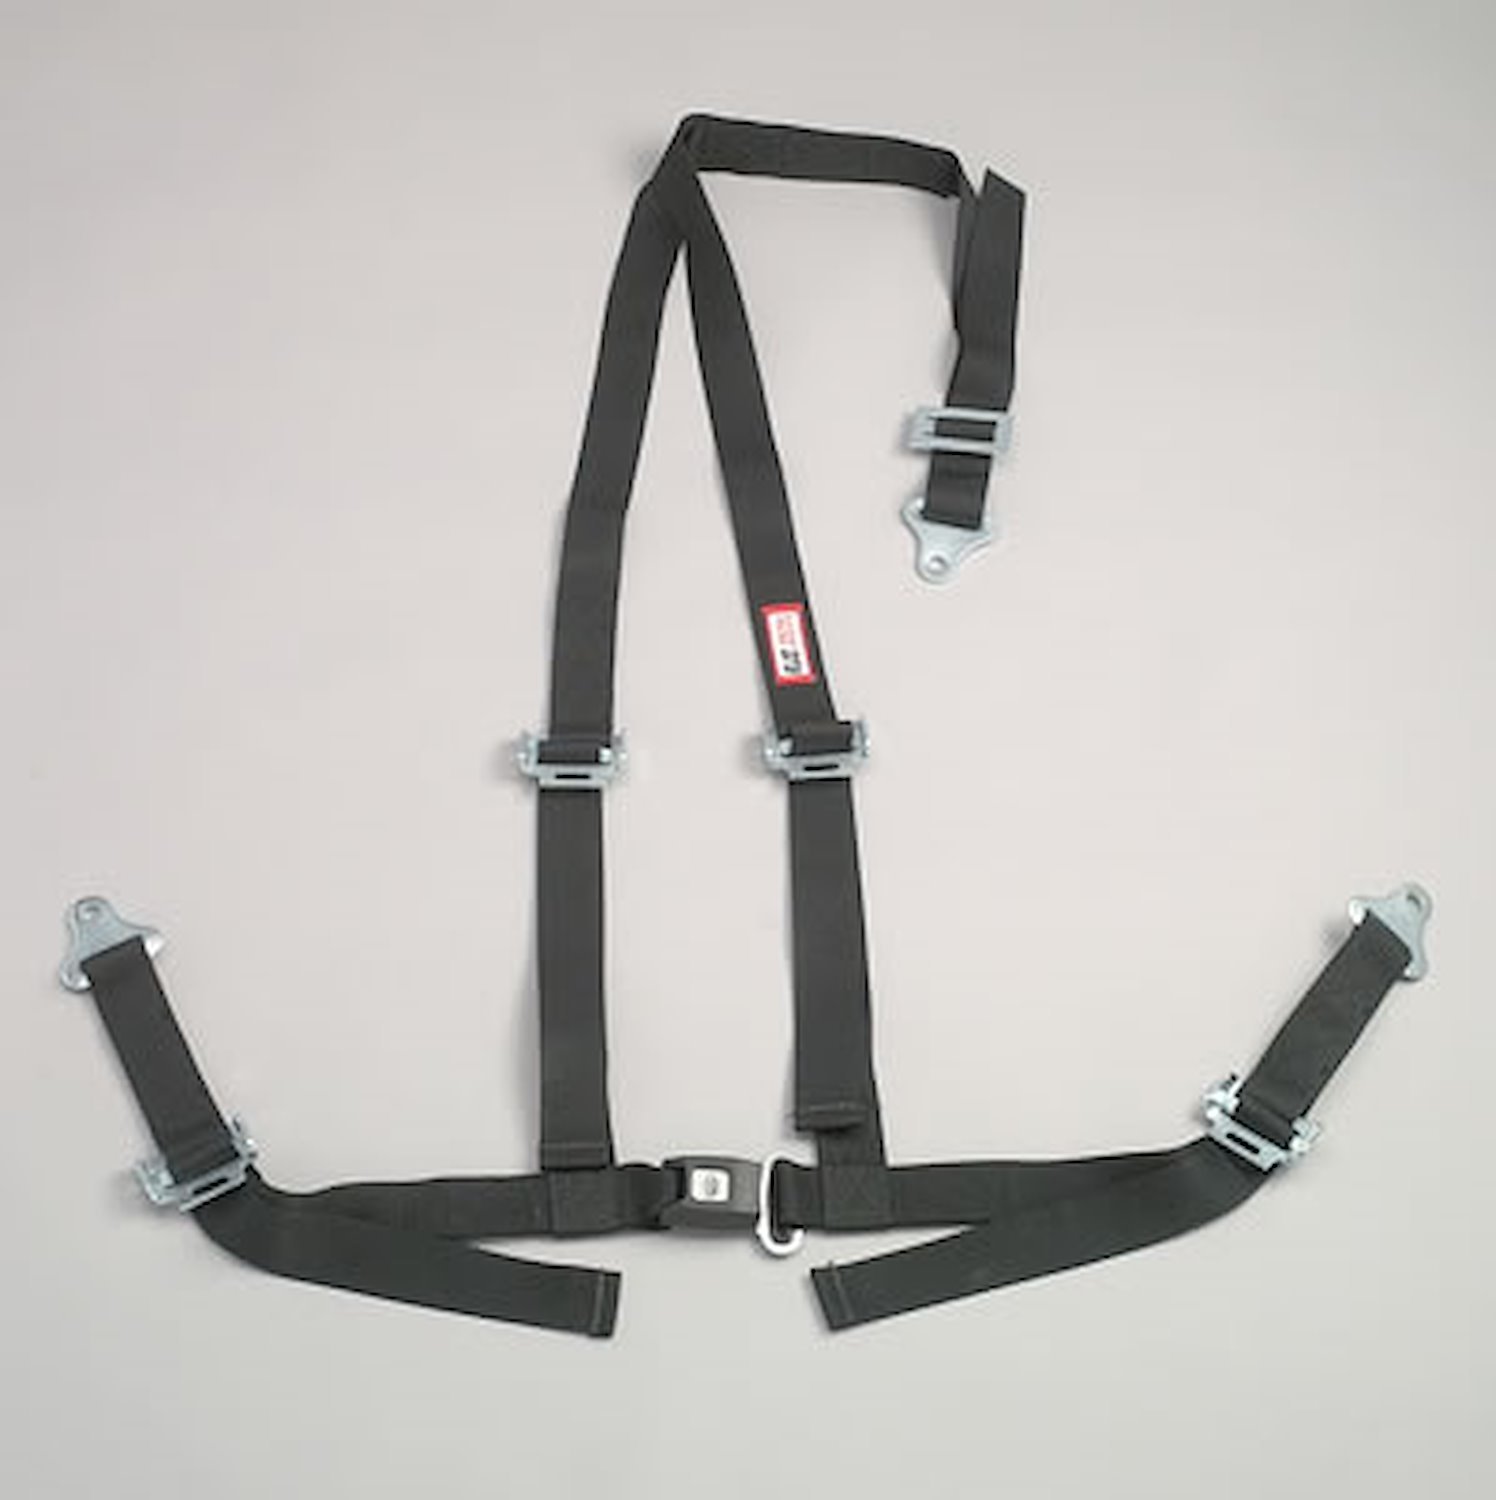 NON-SFI B&T HARNESS 2 PULL UP Lap Belt 2 S. H. Y FLOOR Mount ALL WRAP ENDS w/STERNUM STRAP OD GREEN